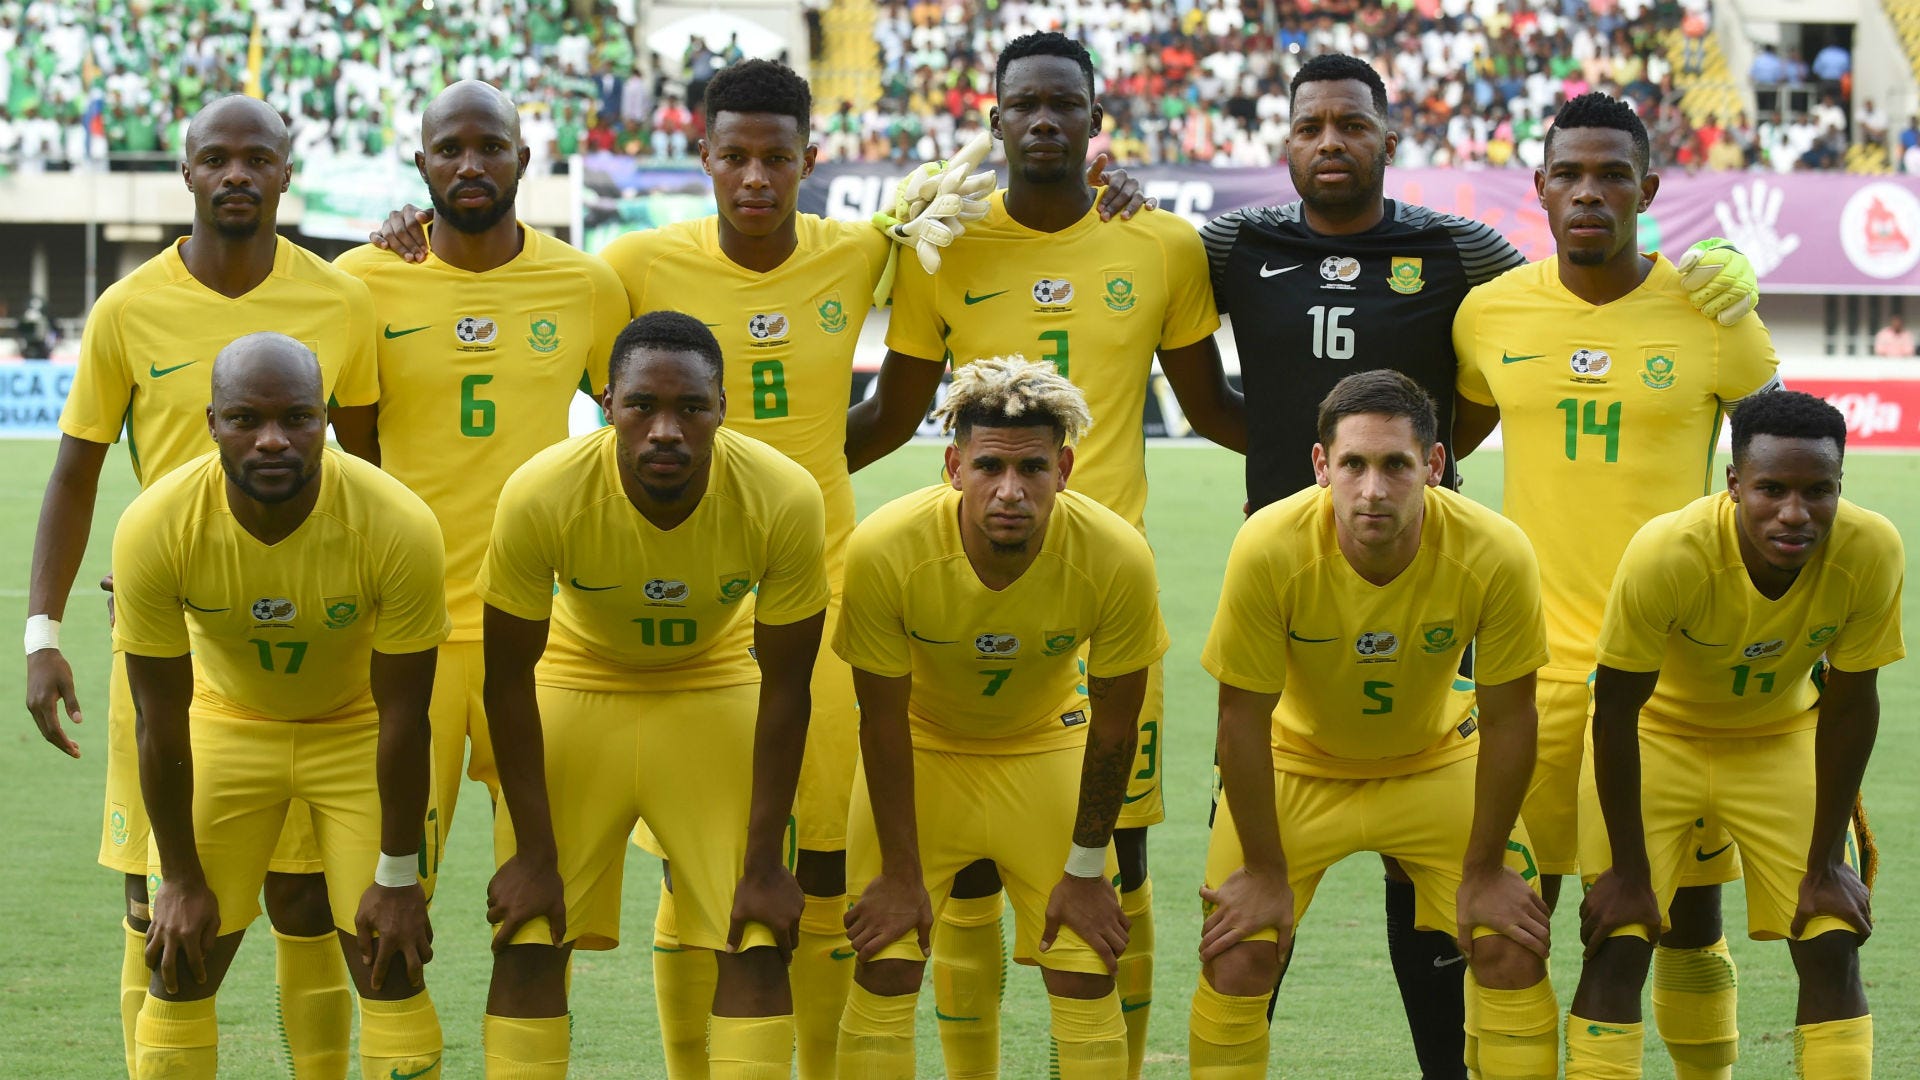 EXTRA TIME: Bafana Bafana fans lose hope in World Cup qualification ...